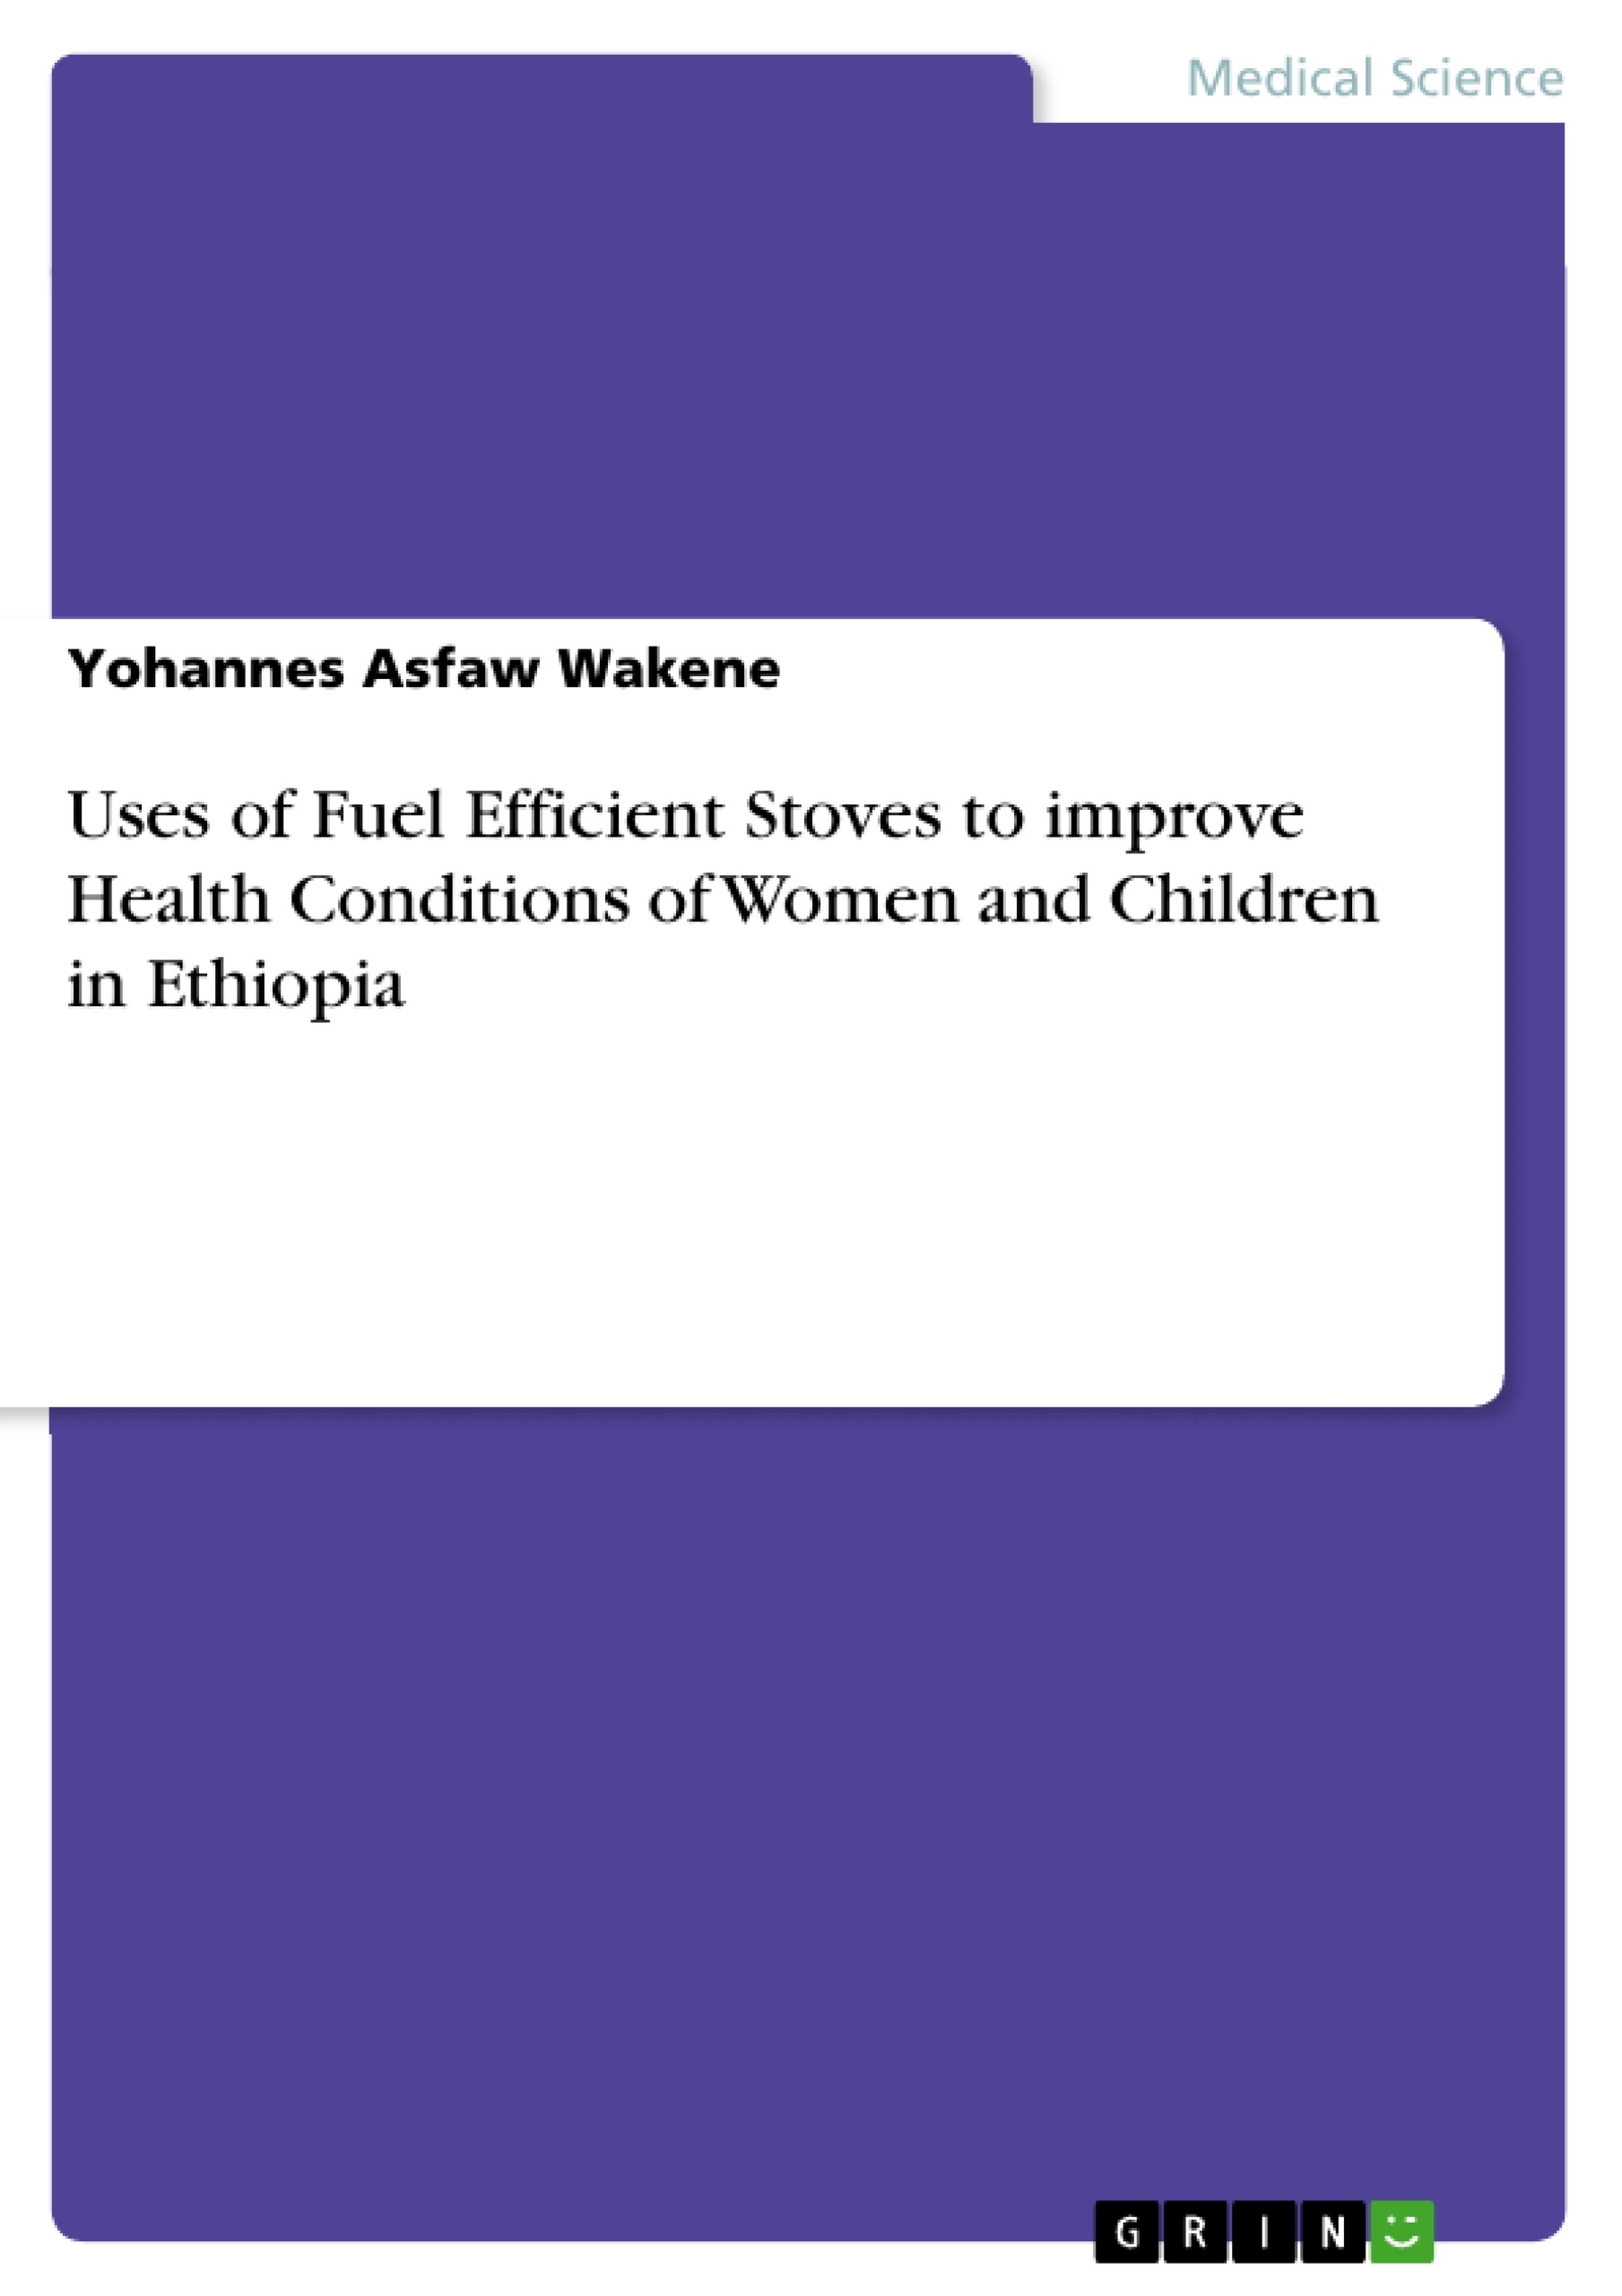 Title: Uses of Fuel Efficient Stoves to improve Health Conditions of Women and Children in Ethiopia